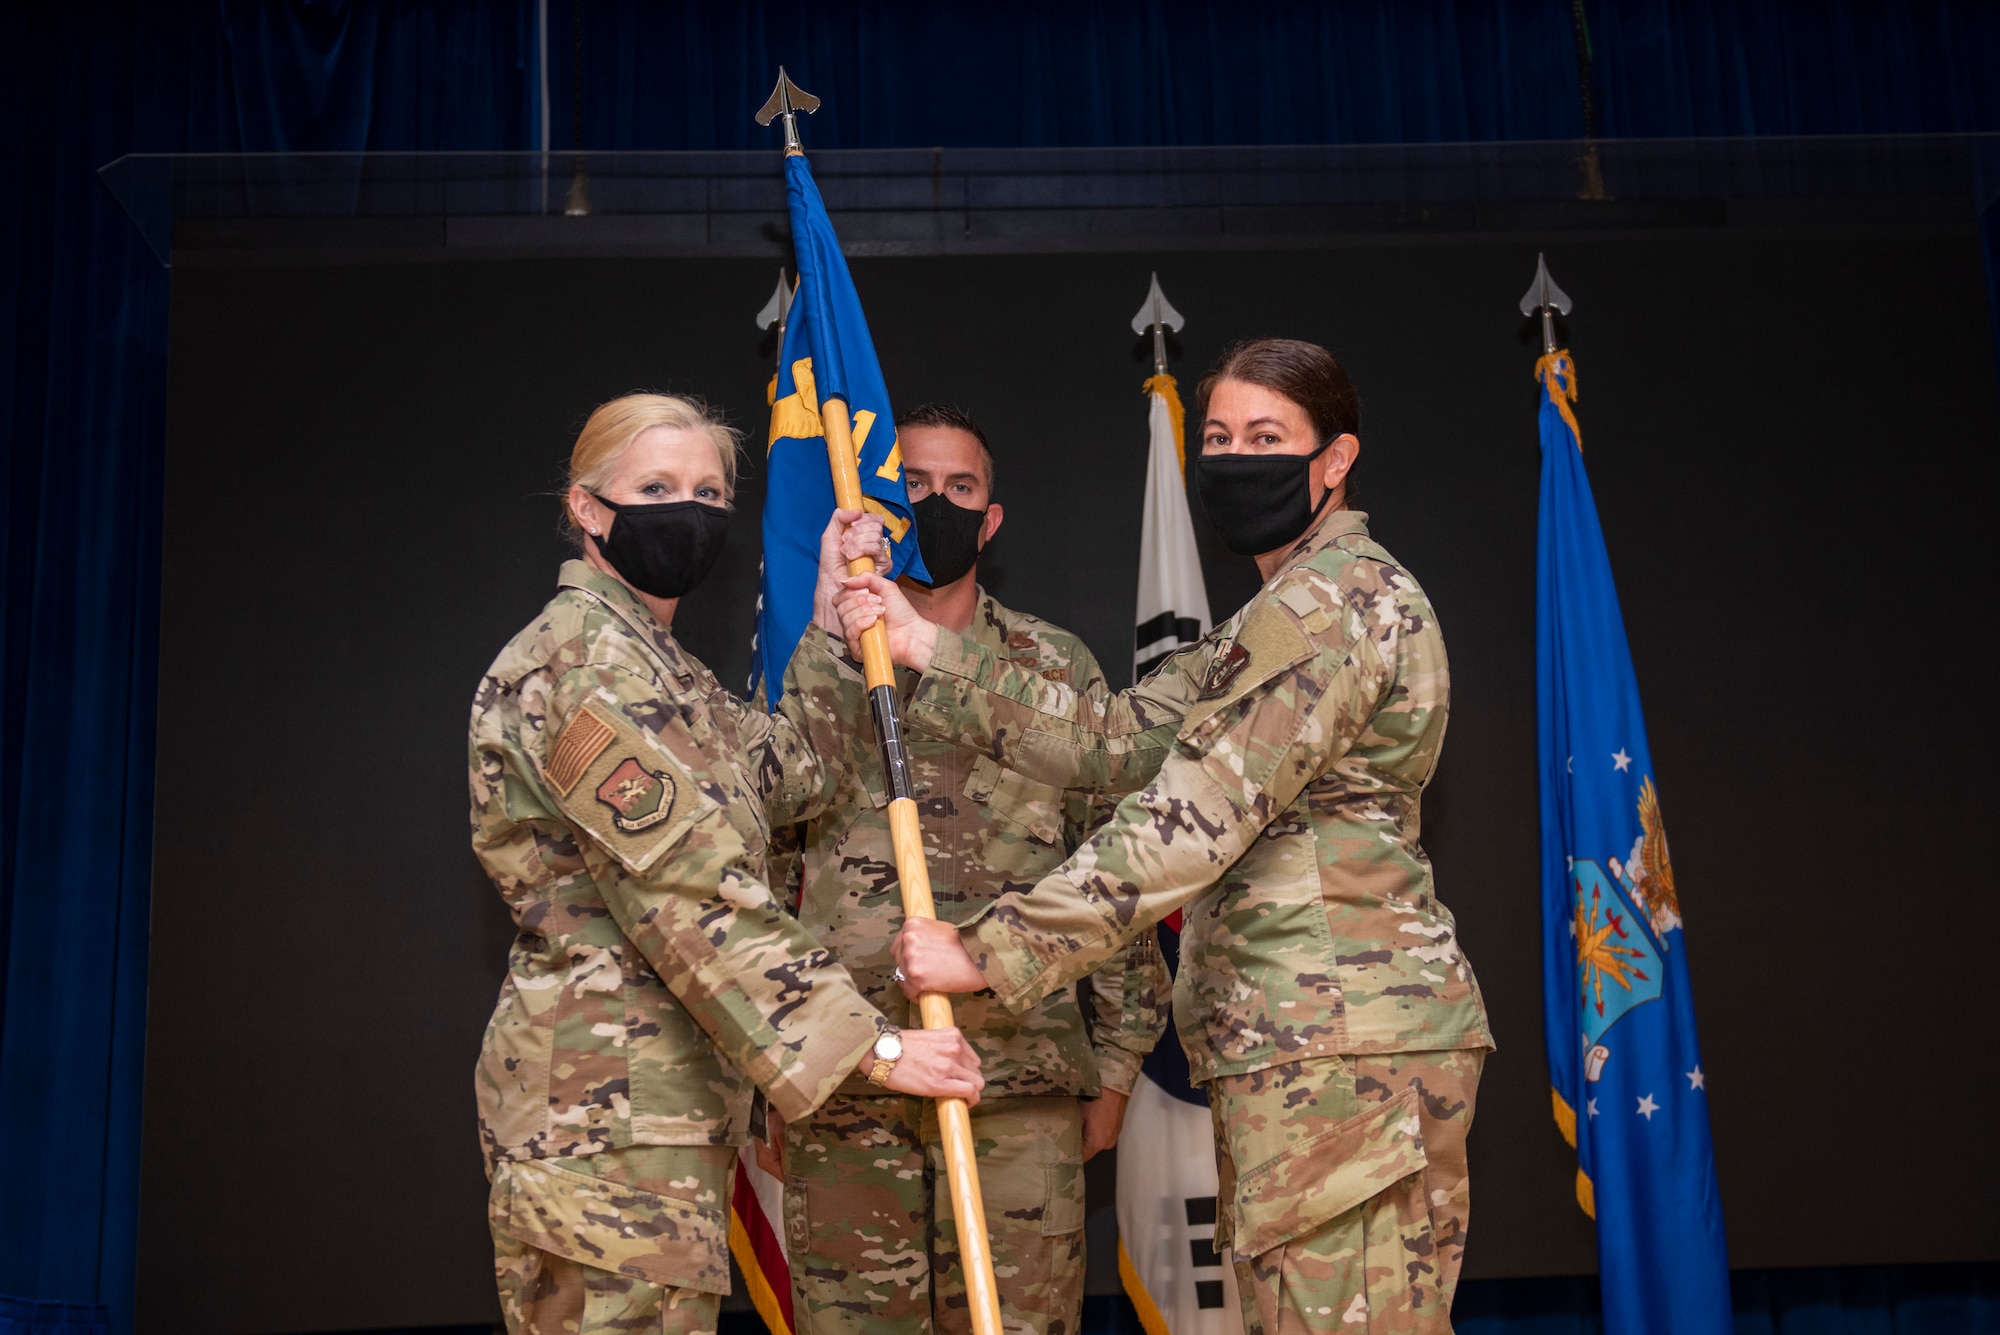 The 51st Force Support Squadron held a change of command ceremony at Osan Air Base, Republic of Korea, July 21, 2021. Lt. Col. Sheri Kraus transferred command of the 51st FSS to Lt. Col. Tamekia Payne